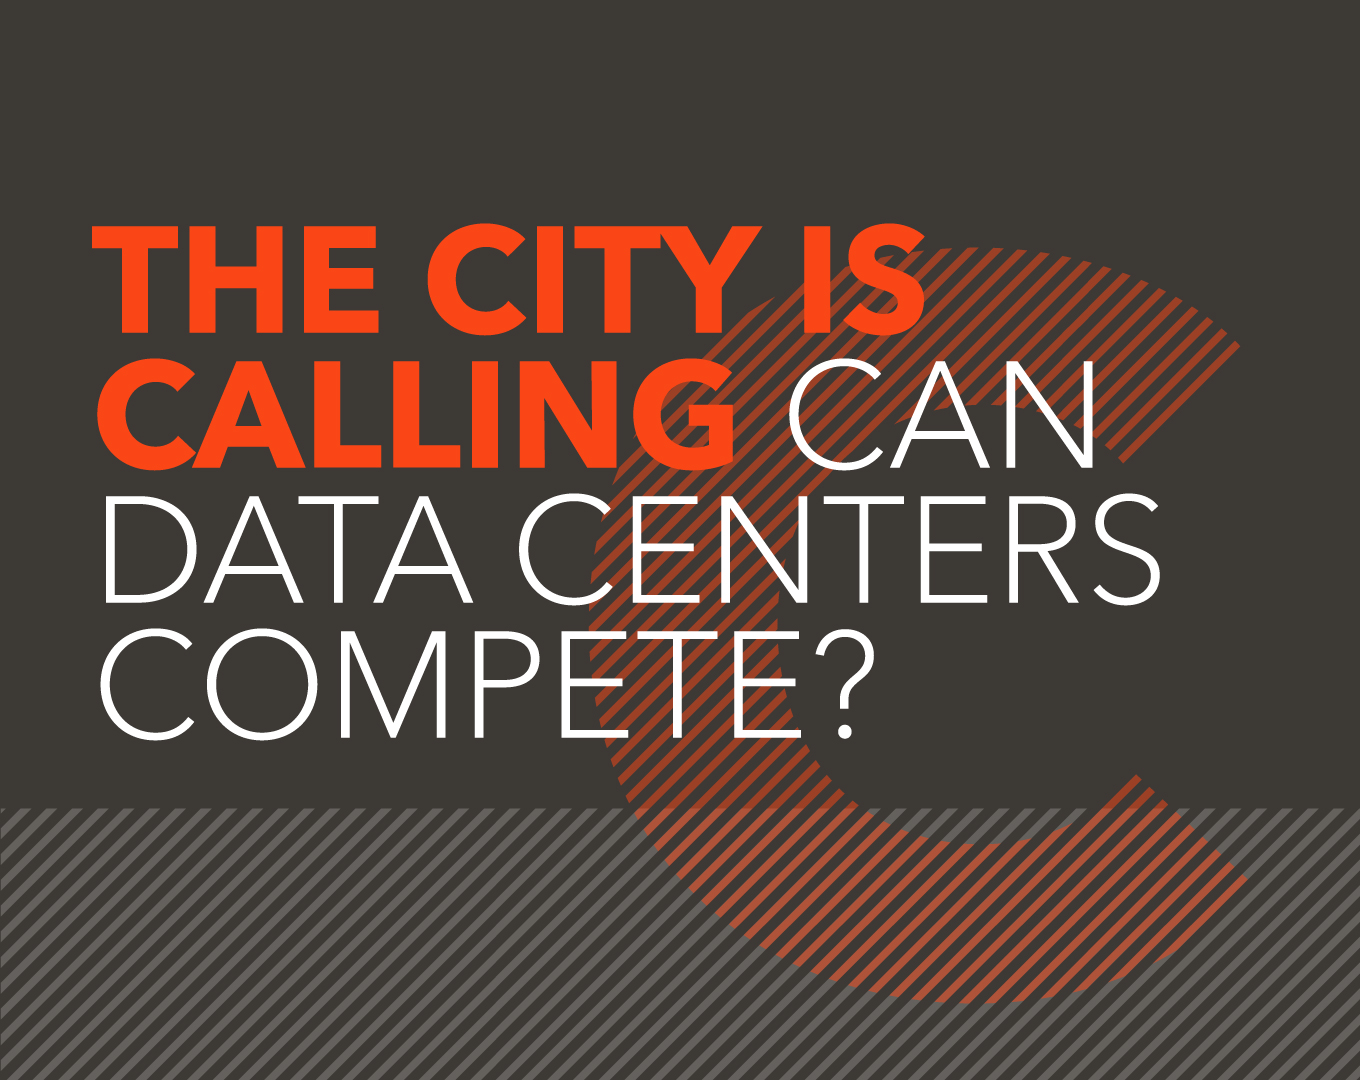 The city is calling. Can data centers compete?